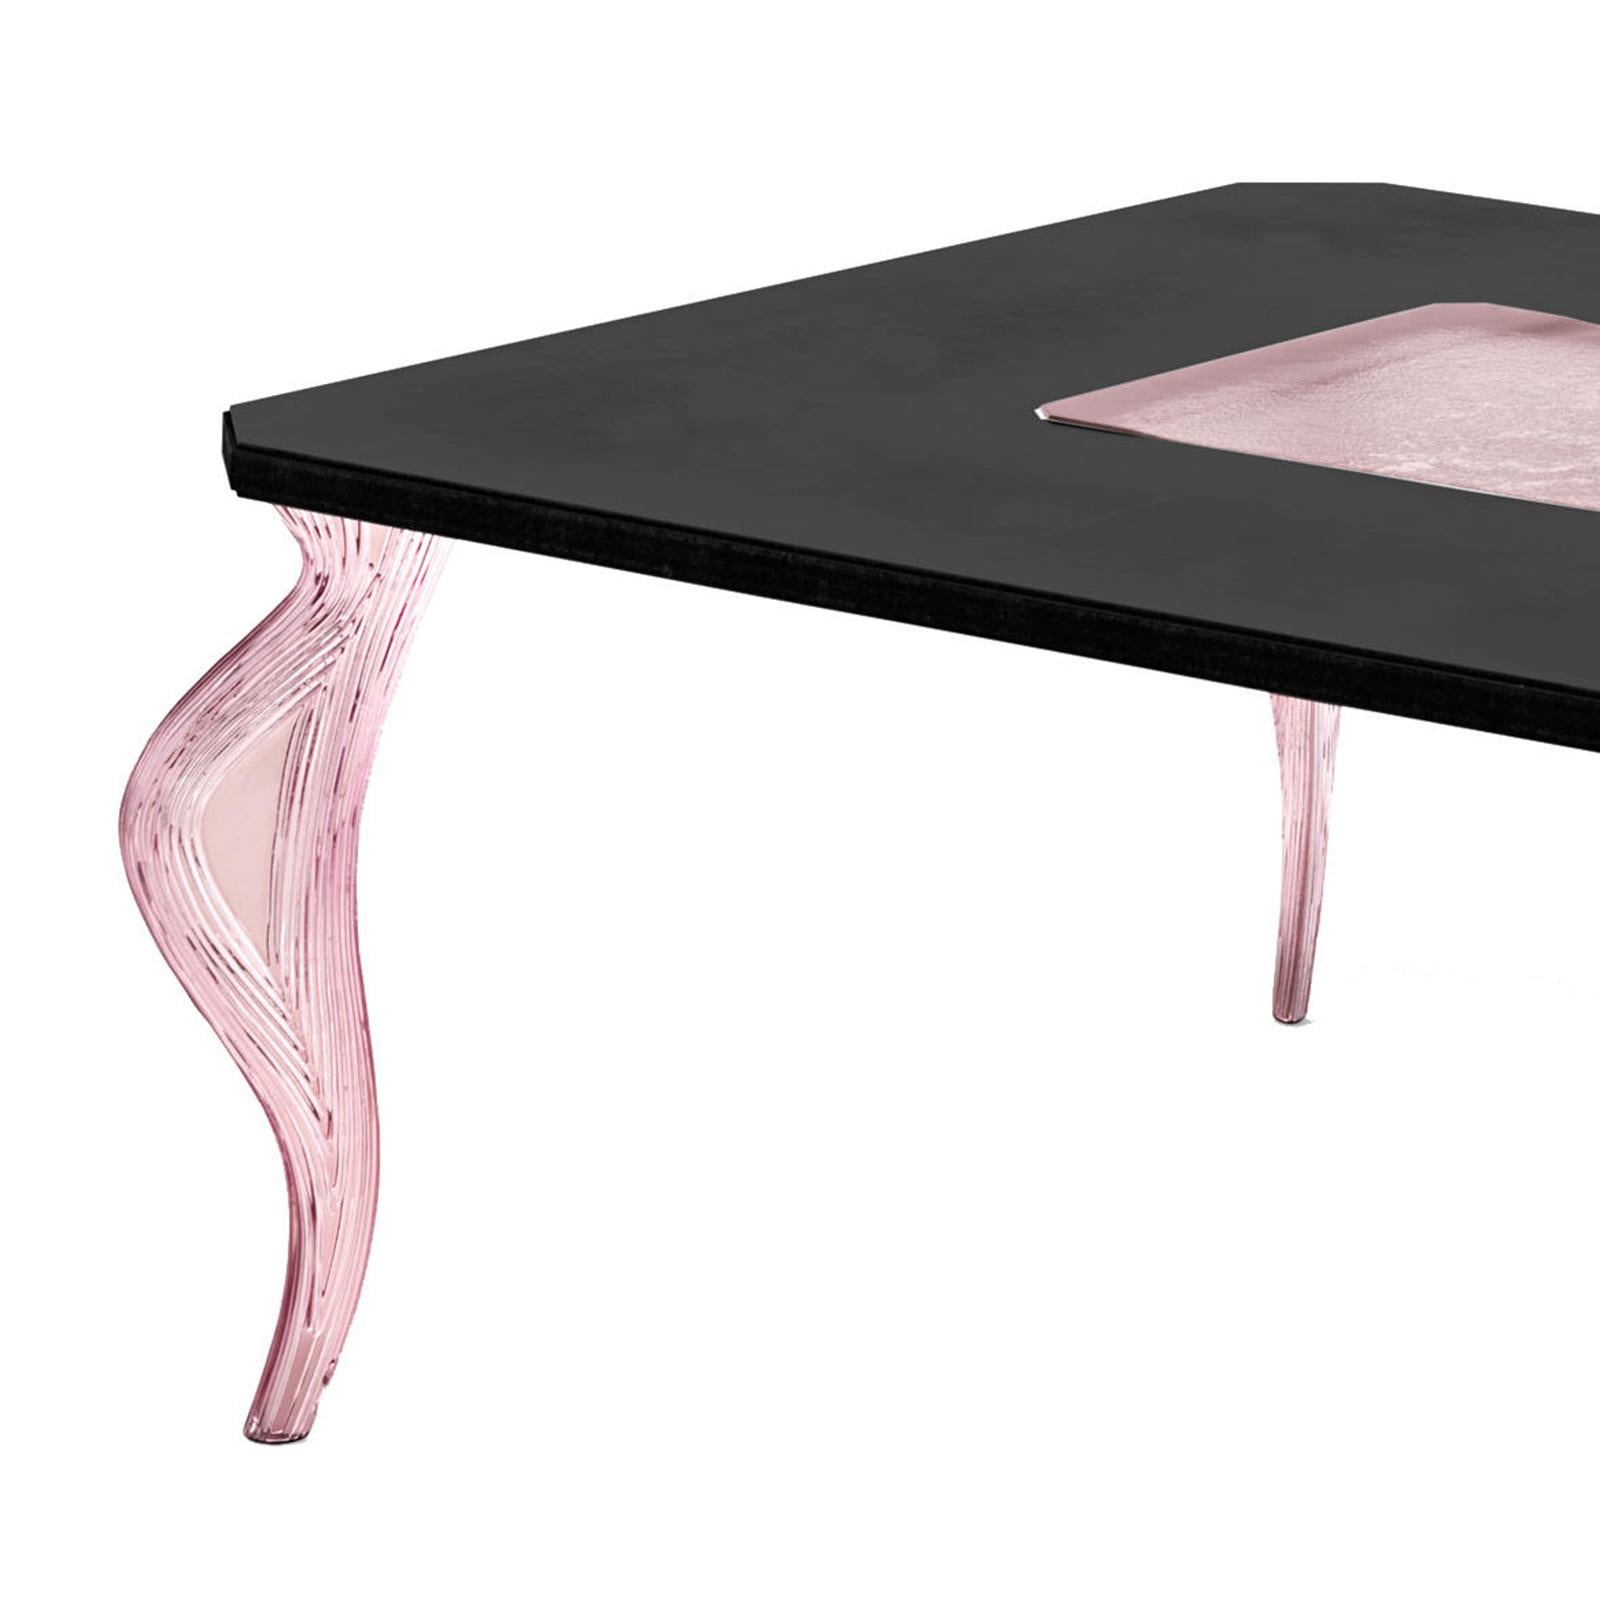 Square table Sillage Rose with solid wood top in black gloss lacquered finish
with 1 central openings in extra light fused glass parts in rose finish, measures: 8mm thickness.
With 4 feets in extra light fused glass in rose finish.